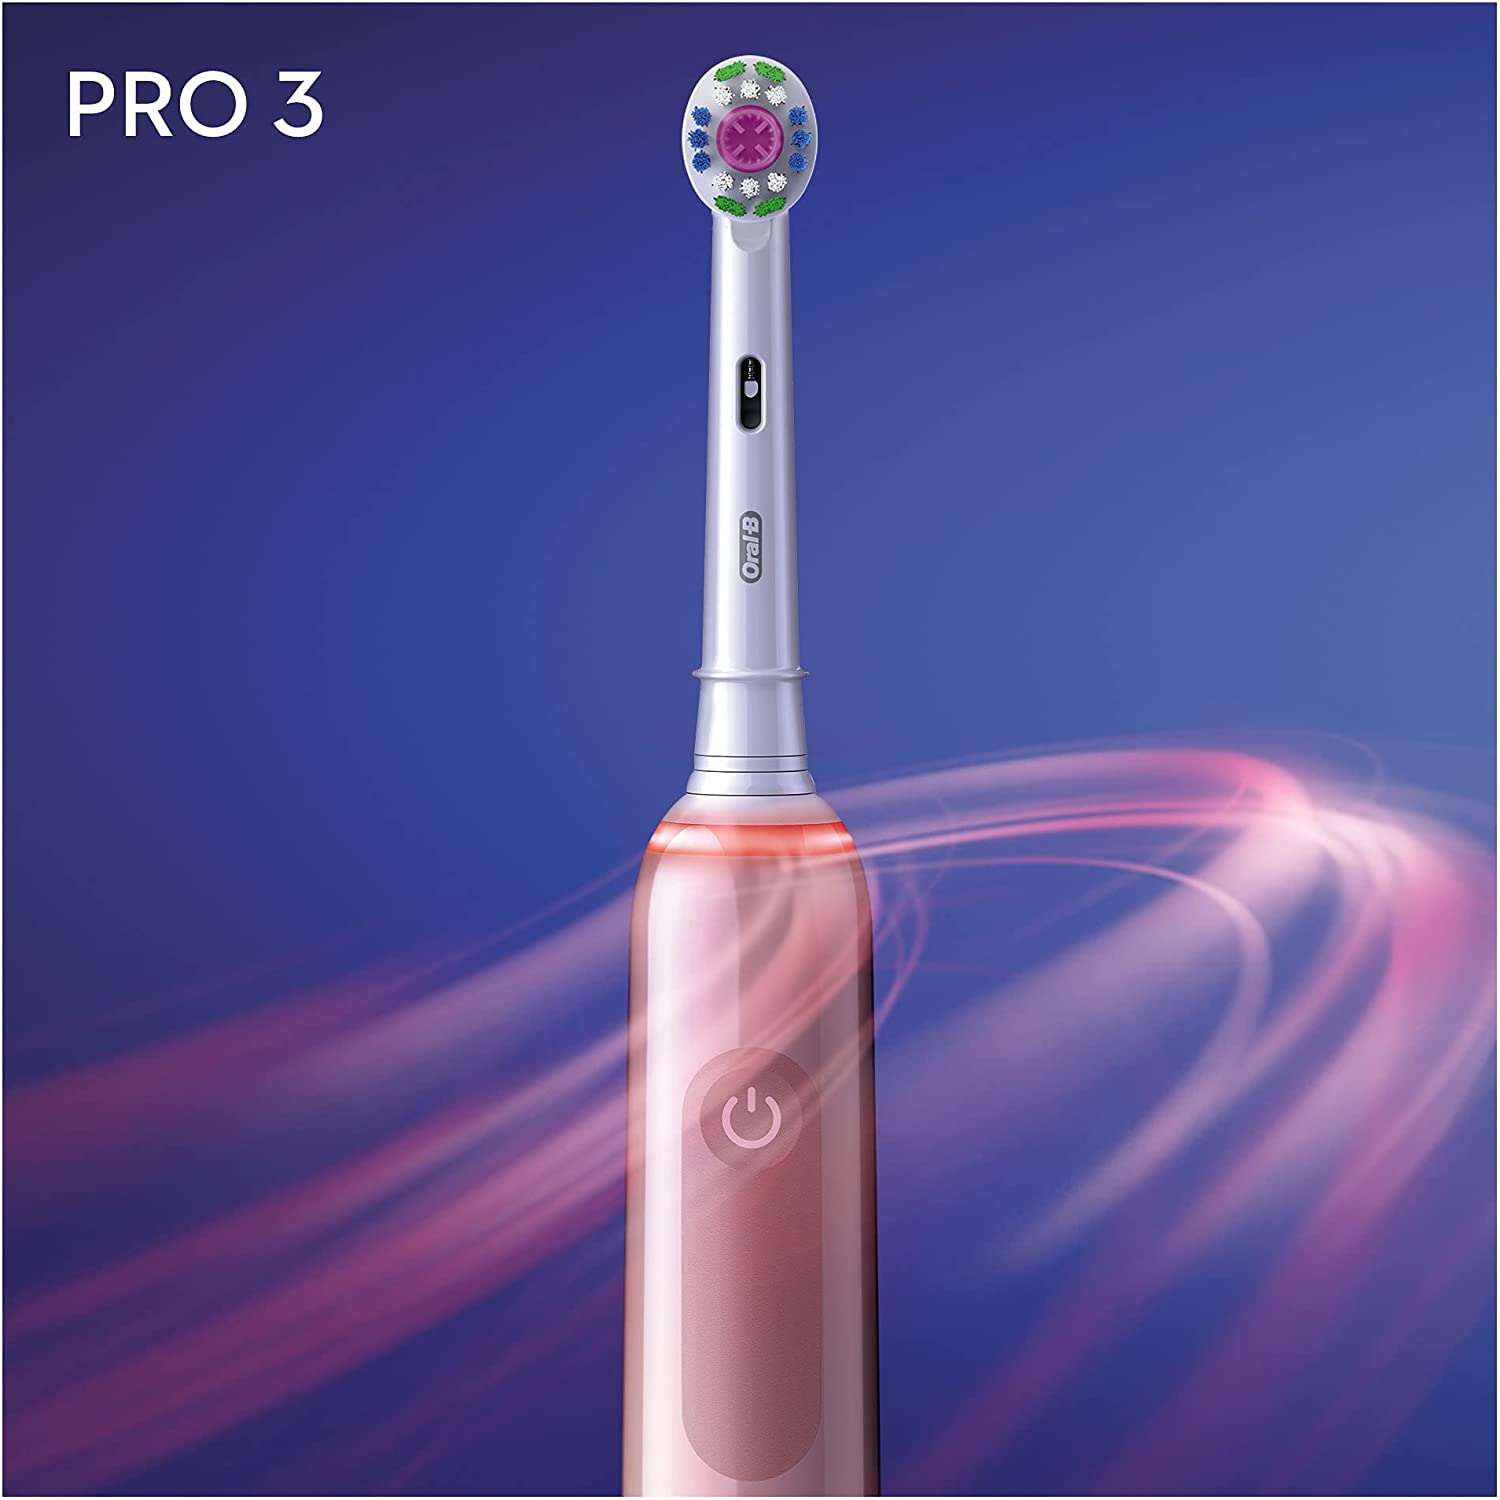 Oral-B Pro 3 - 3500 - Pink Electric Toothbrush, 1 Handle with Visible Pressure Sensor, 1 Toothbrush Head, 1 Travel Case - Healthxpress.ie